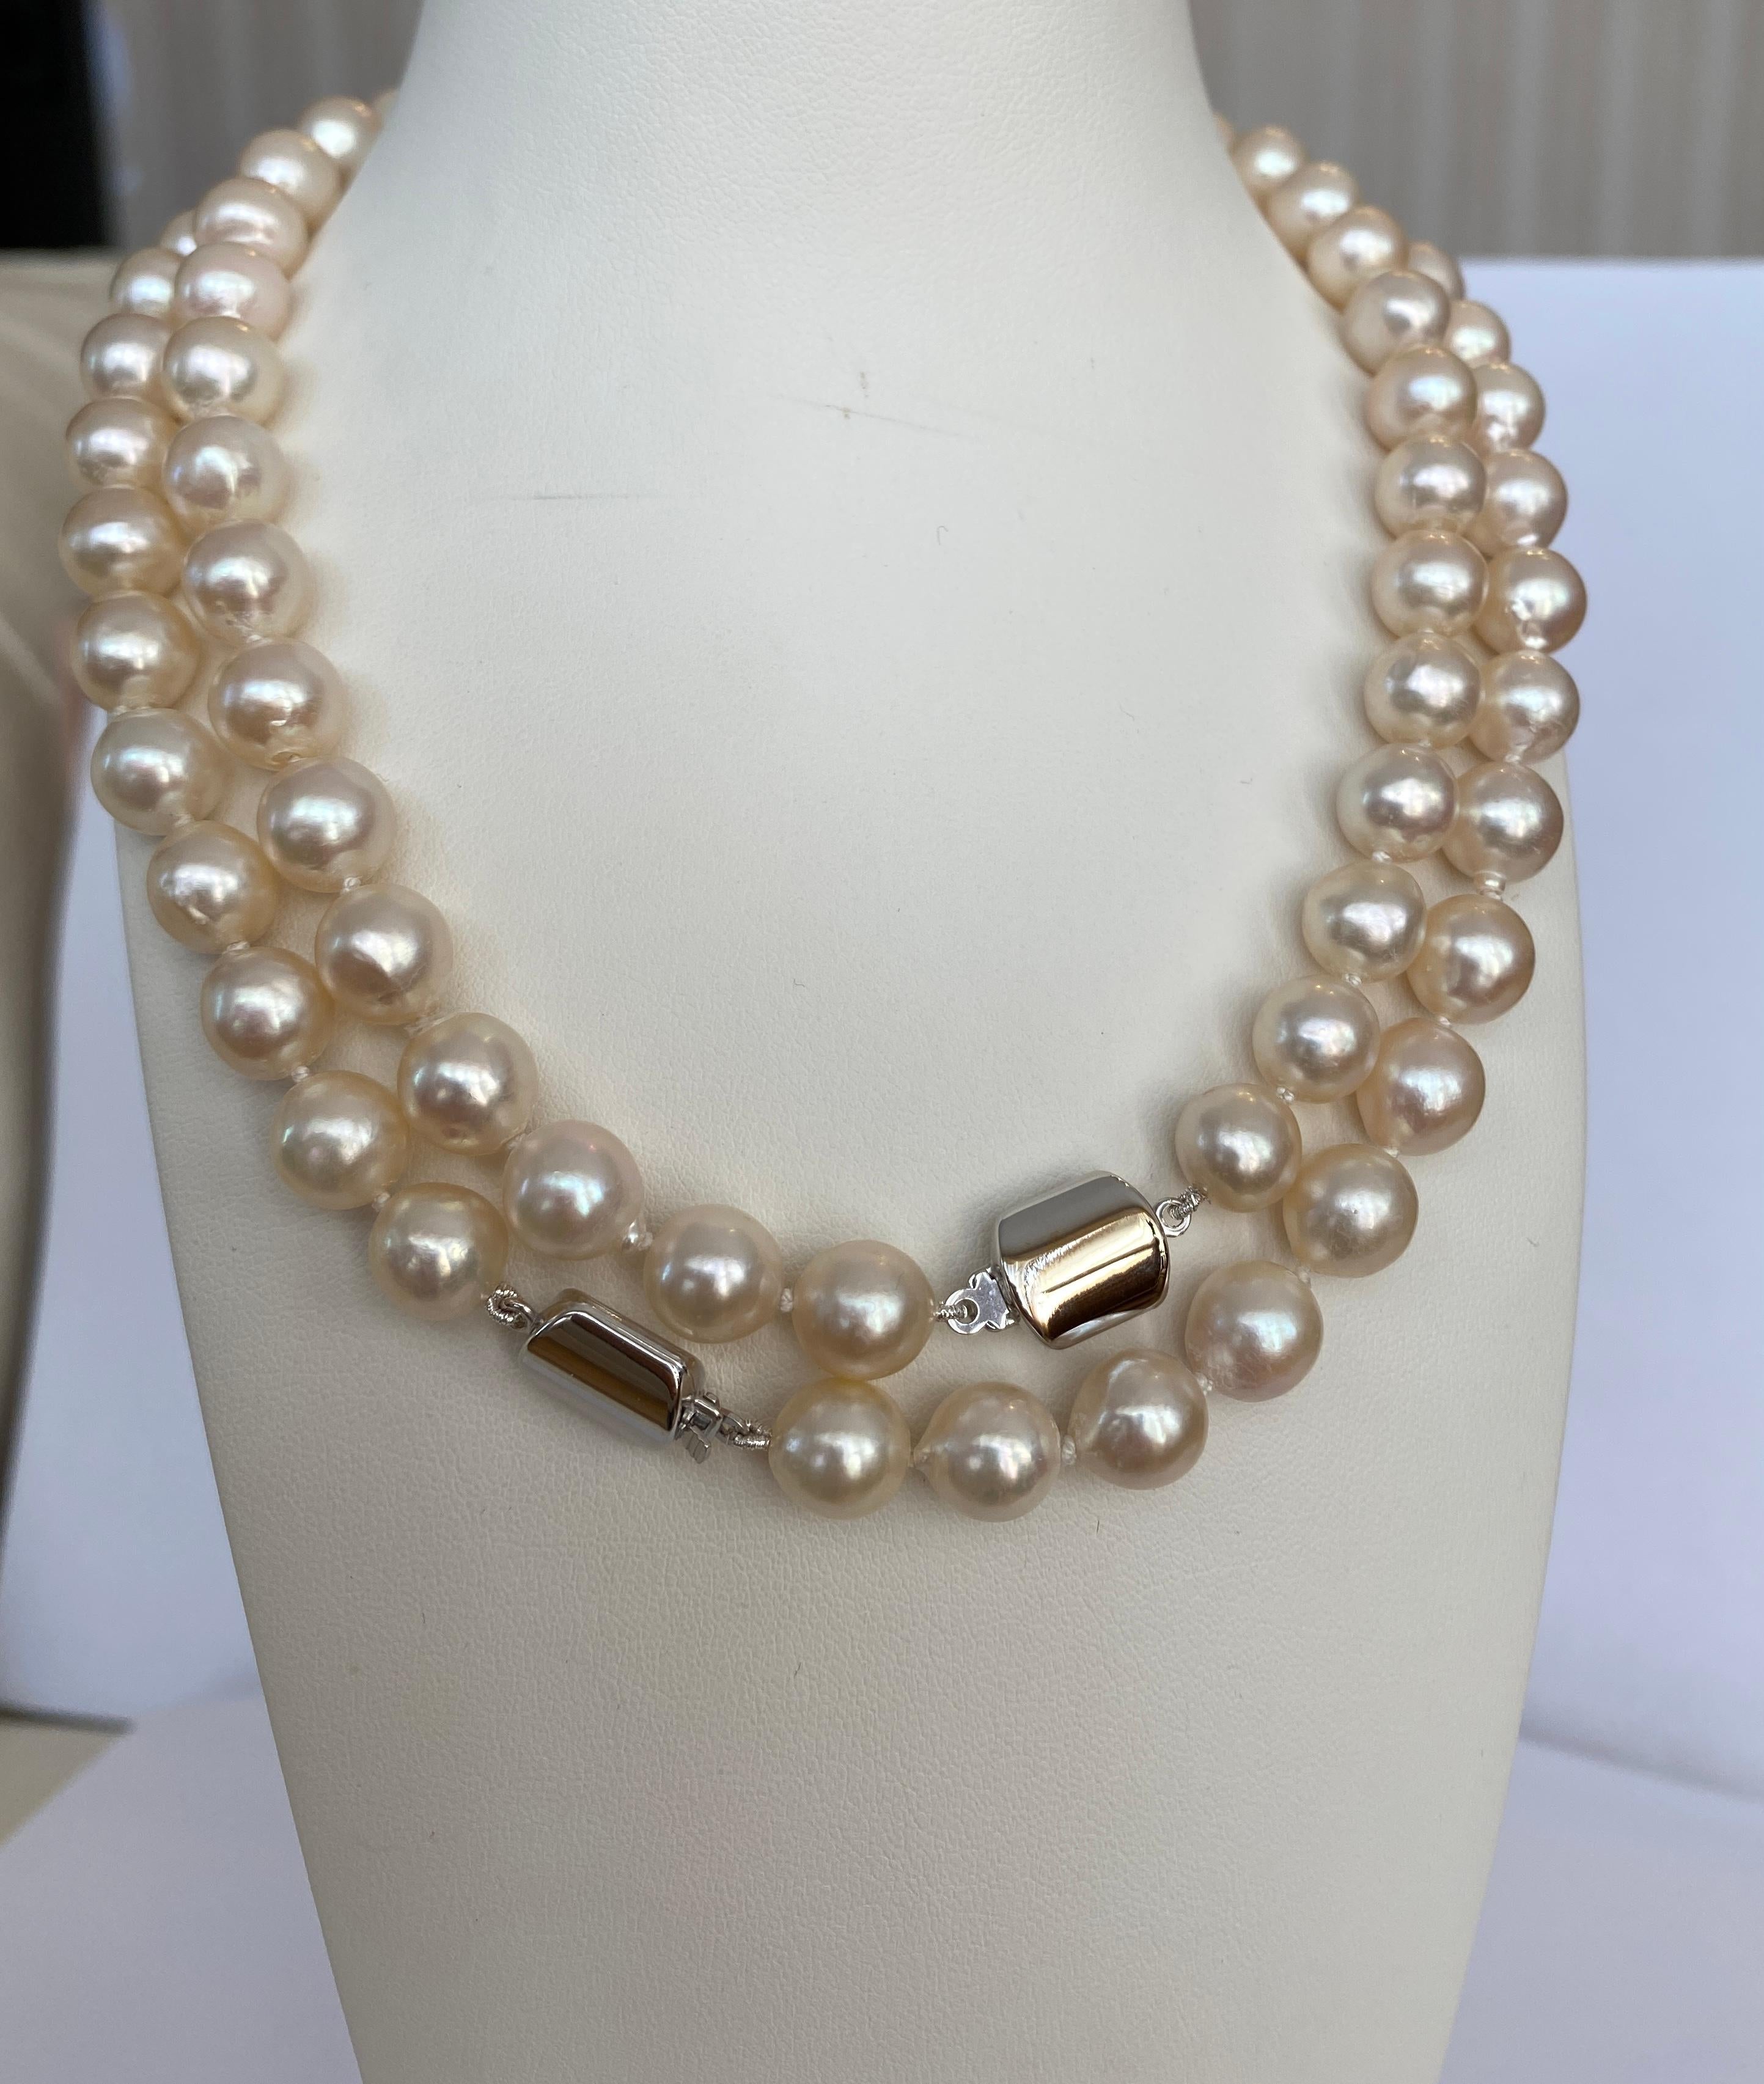 Uncut Two Akoya pearl necklace with 18 kt white gold clasp